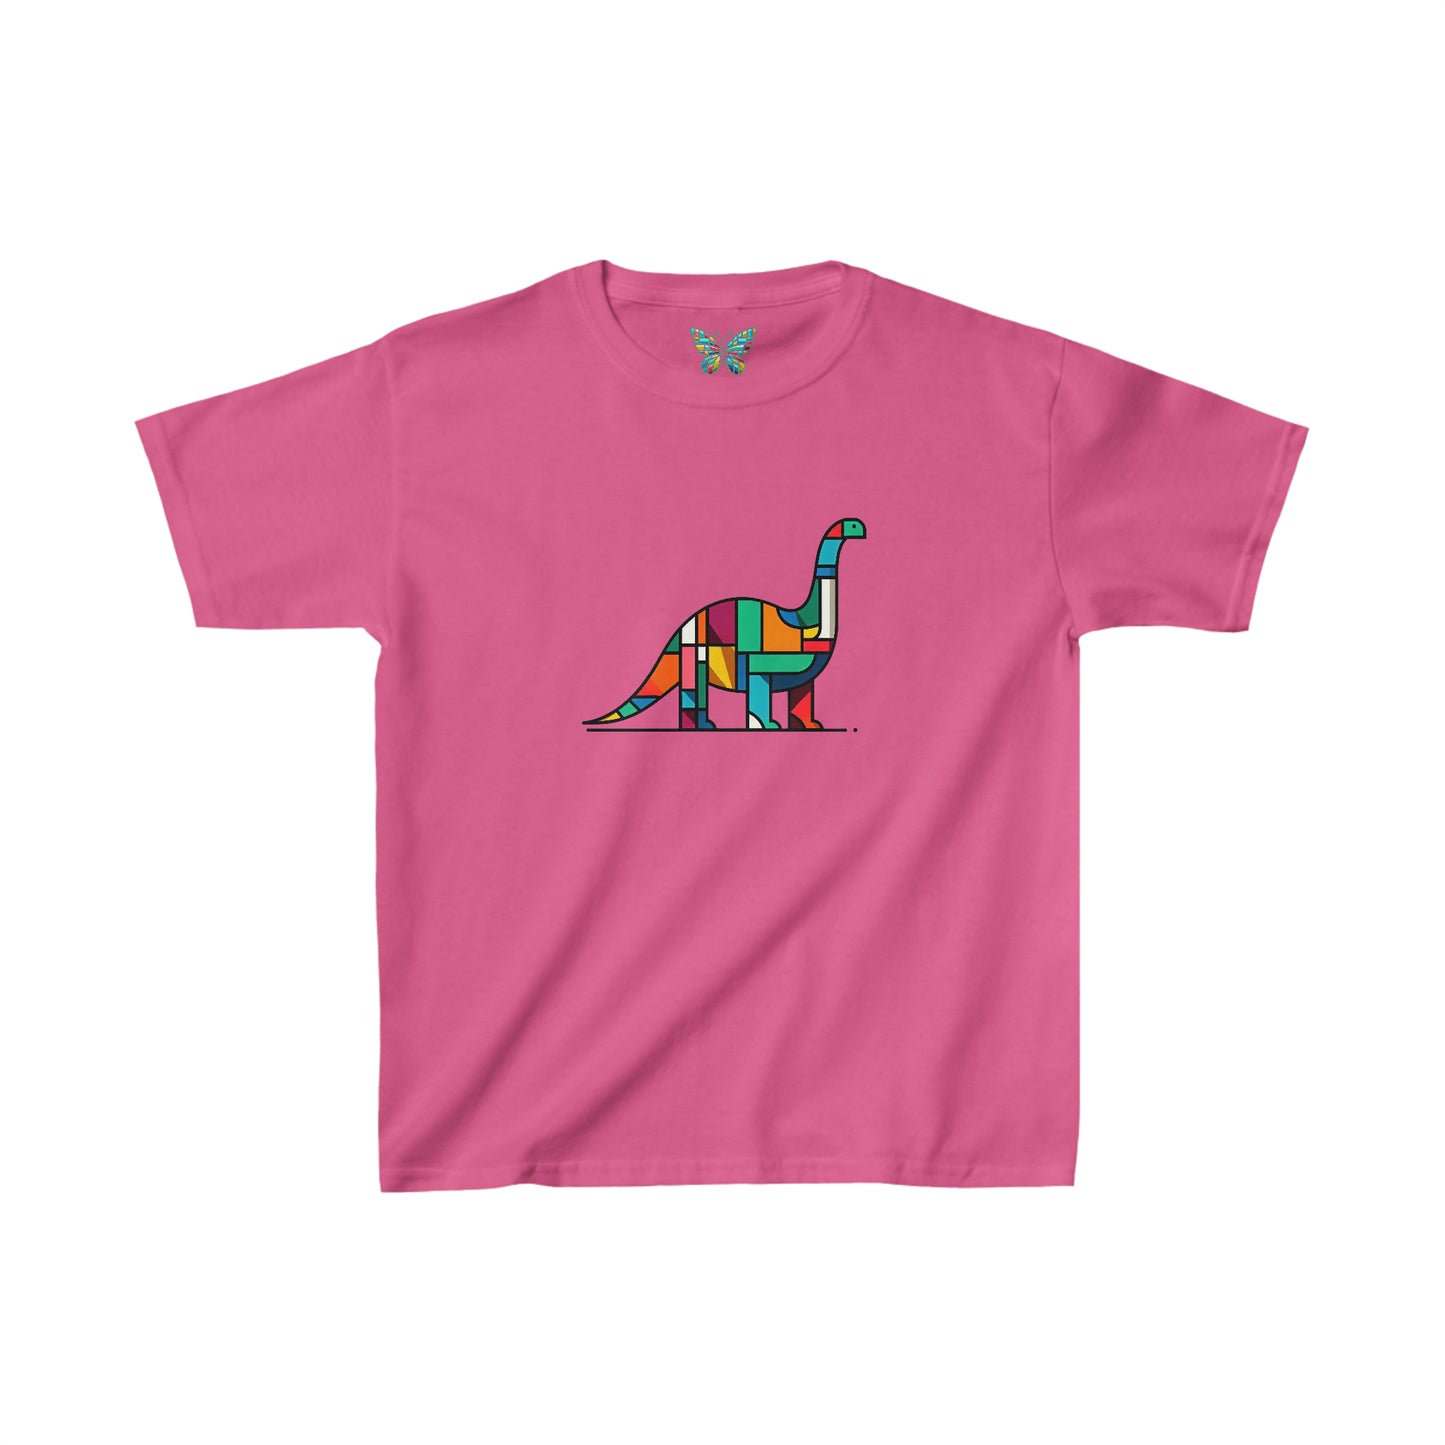 Brontosaurus Joviquity - Youth - Snazzle Tee